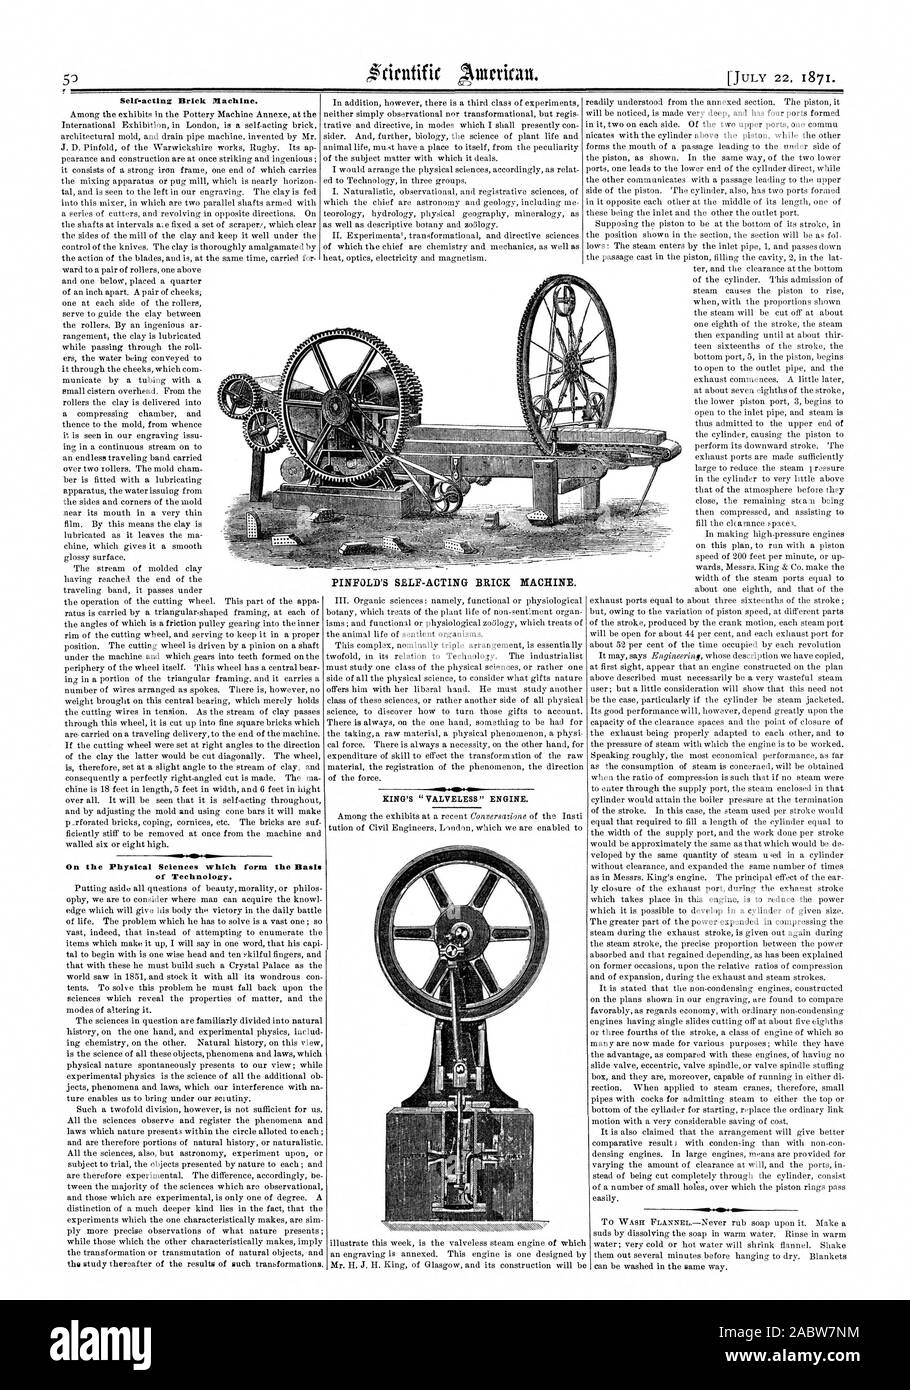 EINFOLD'S SELF-ACTING BRICK MACHINE. ICING'S 'VALVELESS' ENGINE. Self-acting Brick Machine. On the Physical Sciences which form the Basis of Technology., scientific american, 1871-07-22 Stock Photo